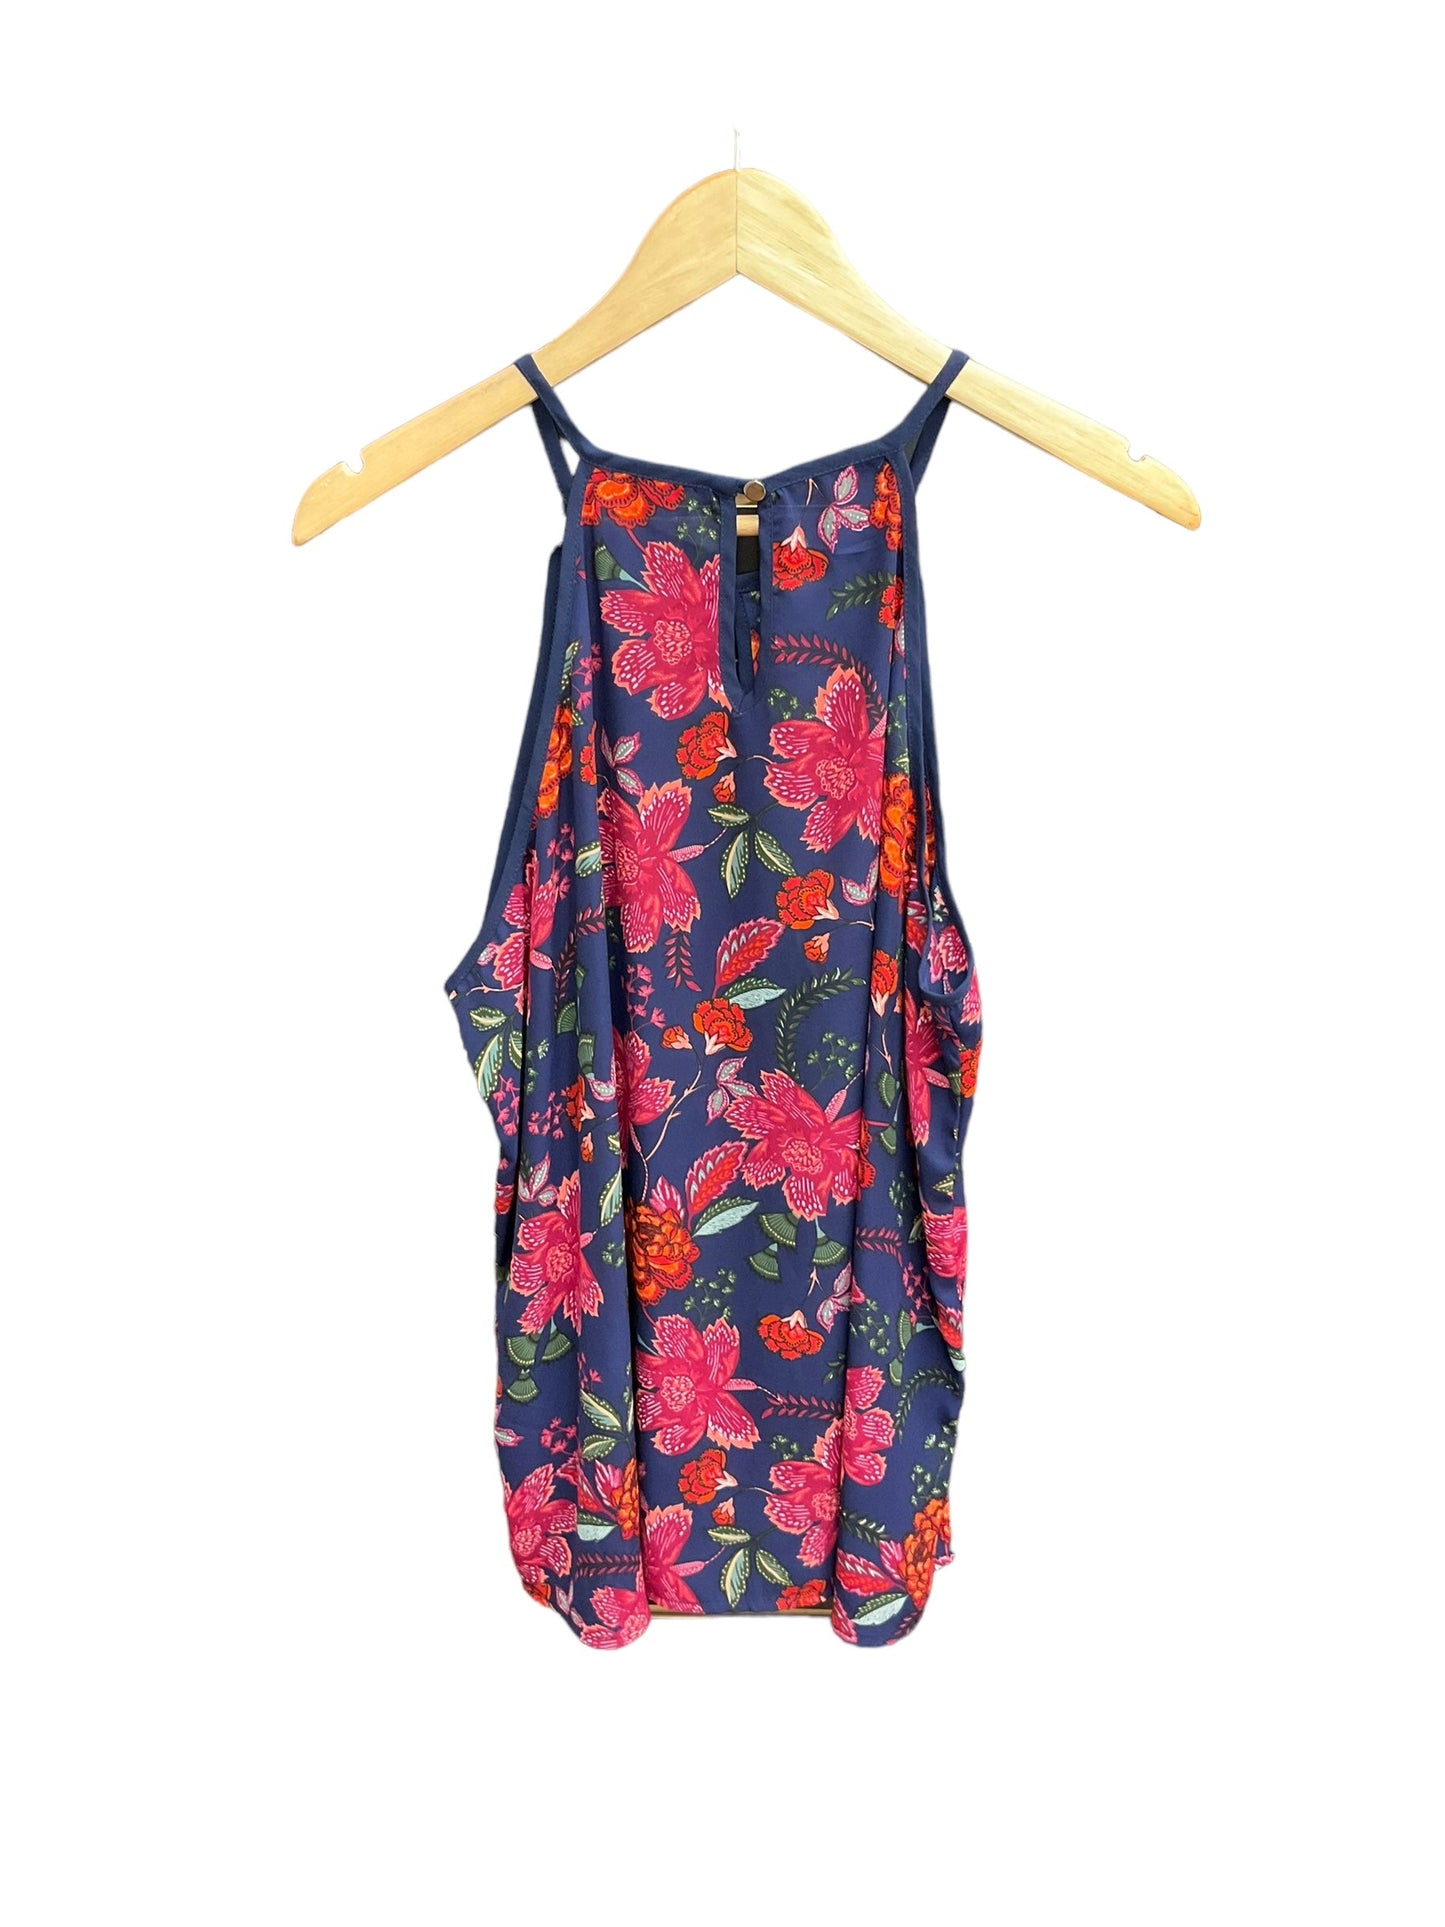 Floral Print Top Sleeveless Papermoon, Size 2x